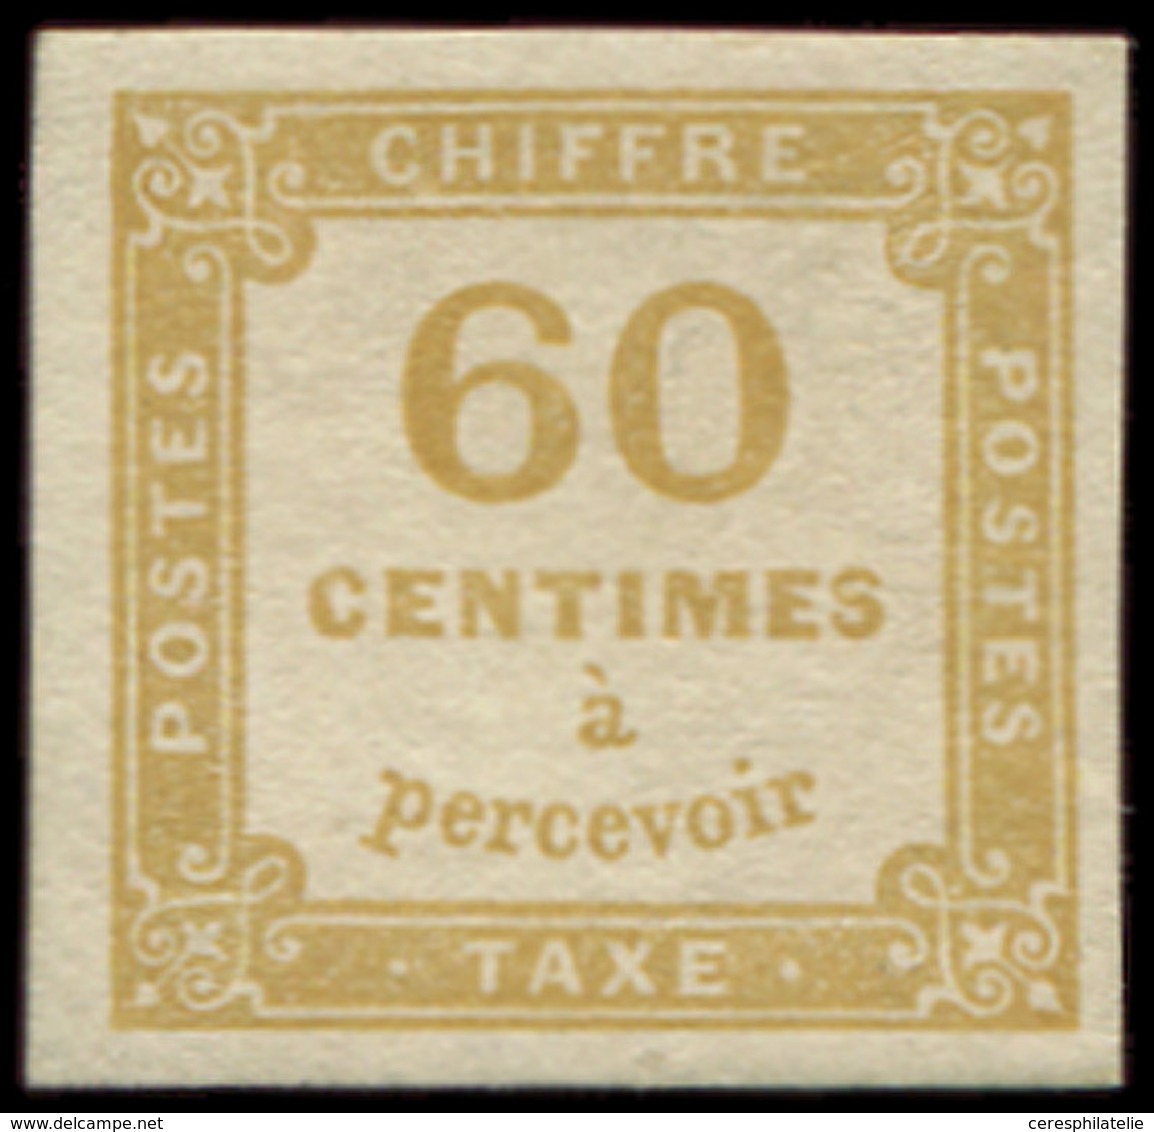 * TAXE - 8   60c. Jaune-bistre, Gomme Mate, Sinon TB - 1859-1959 Lettres & Documents